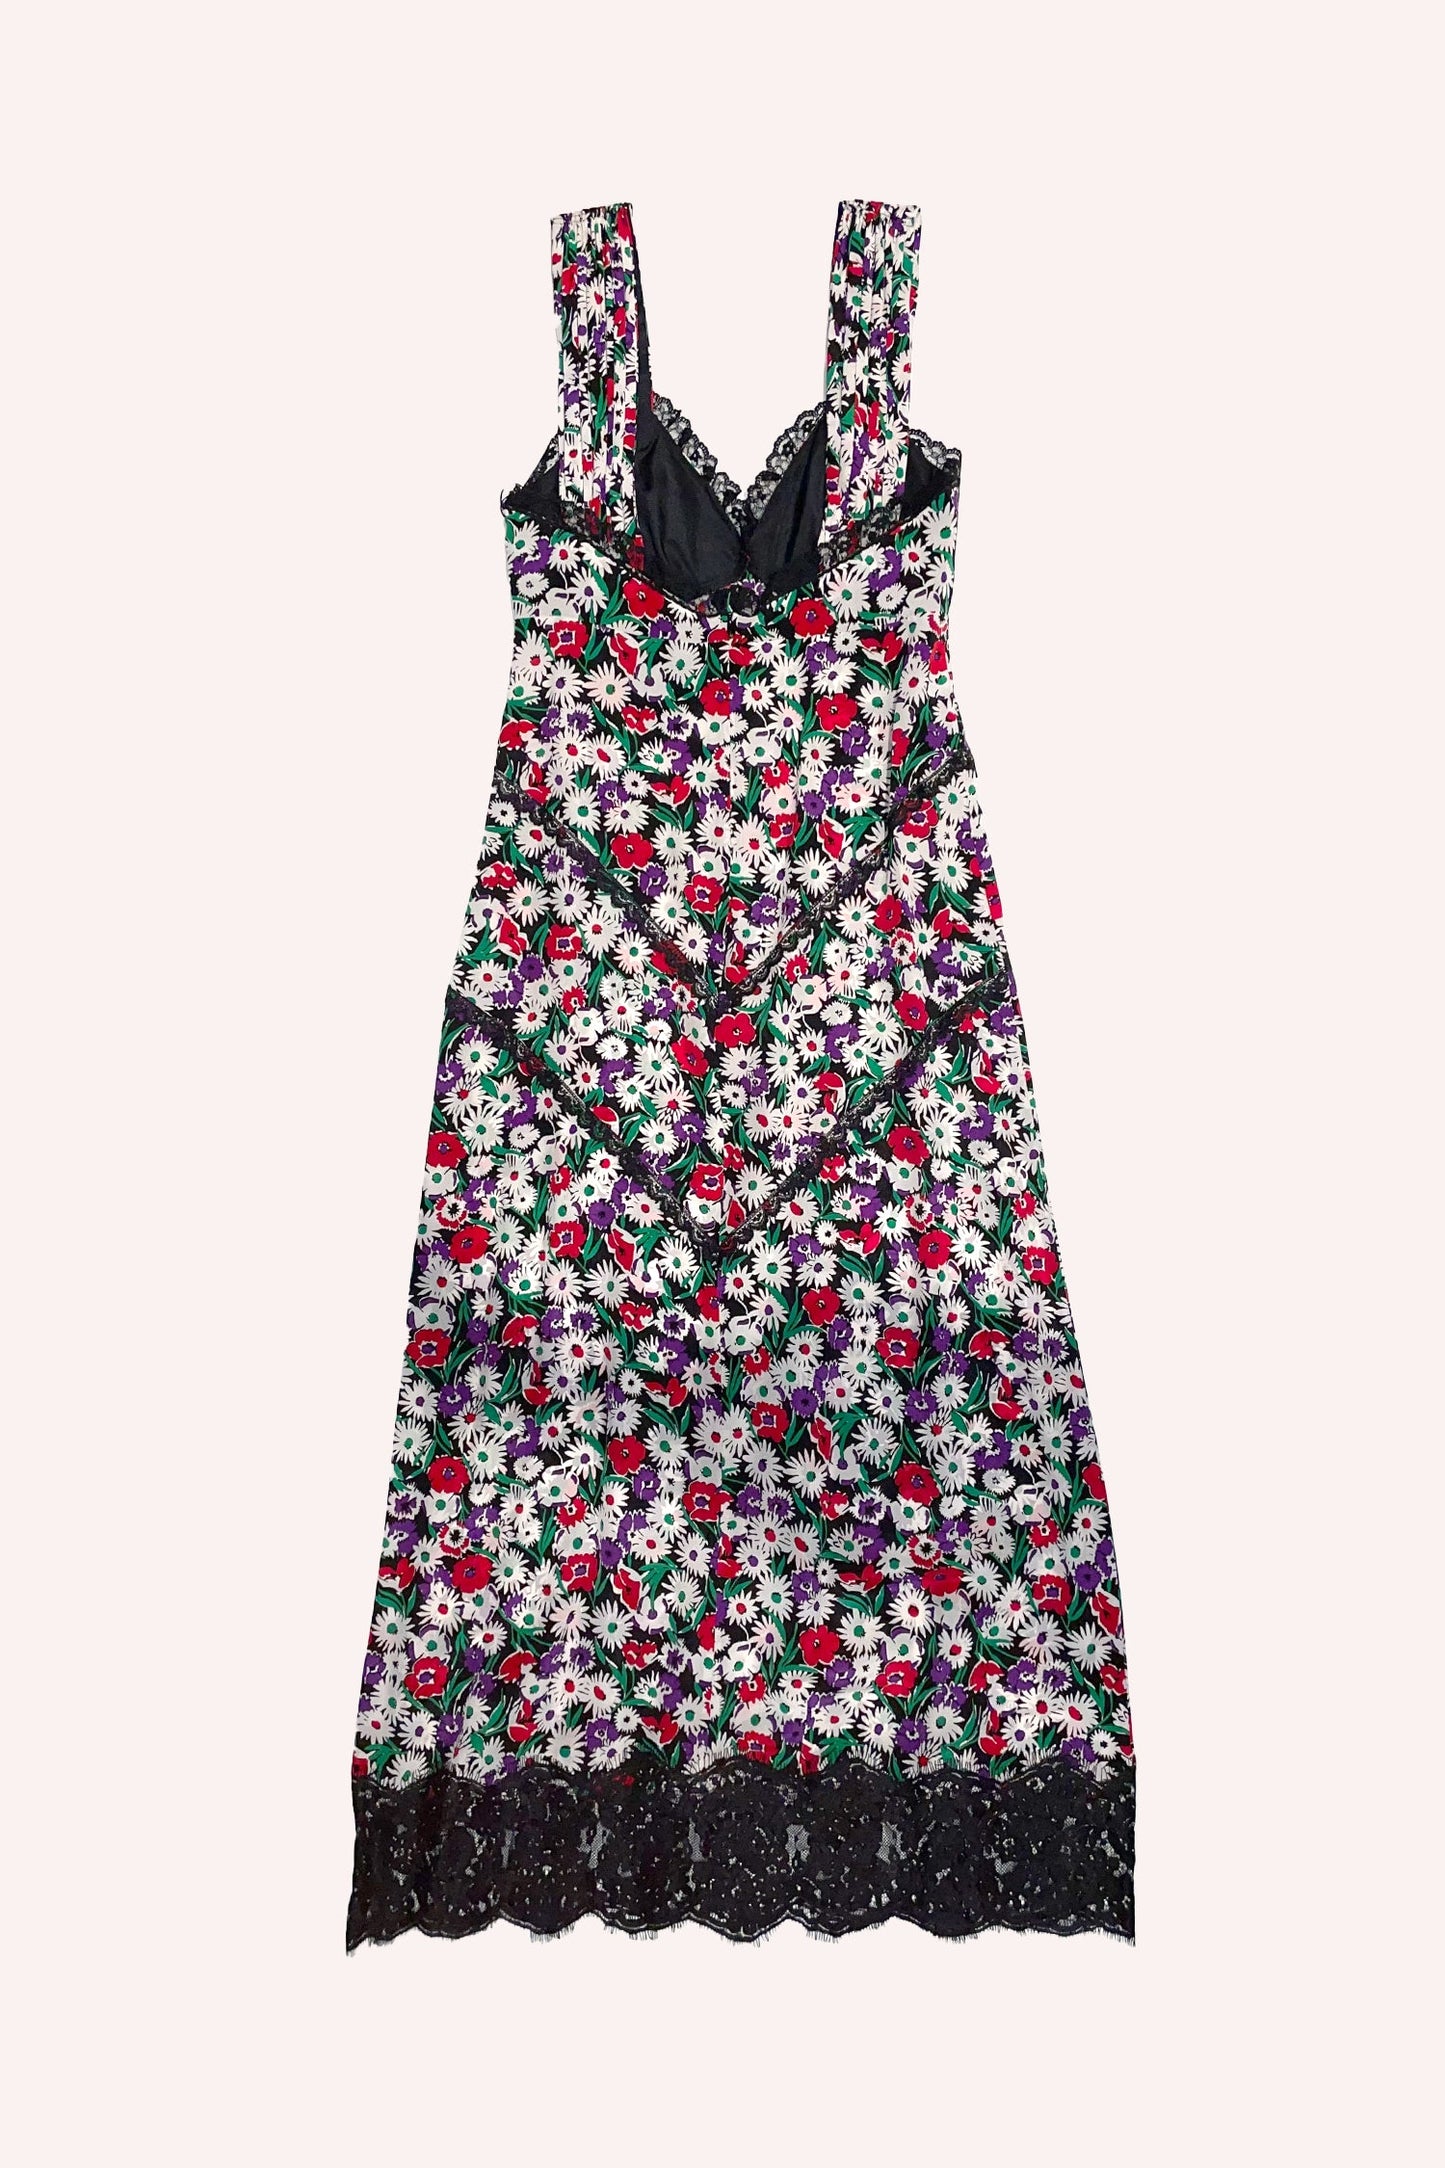 Daisies Dress Rouge, 2-V-shape seams in front, 2-straps over the shoulders, black lace at bottom